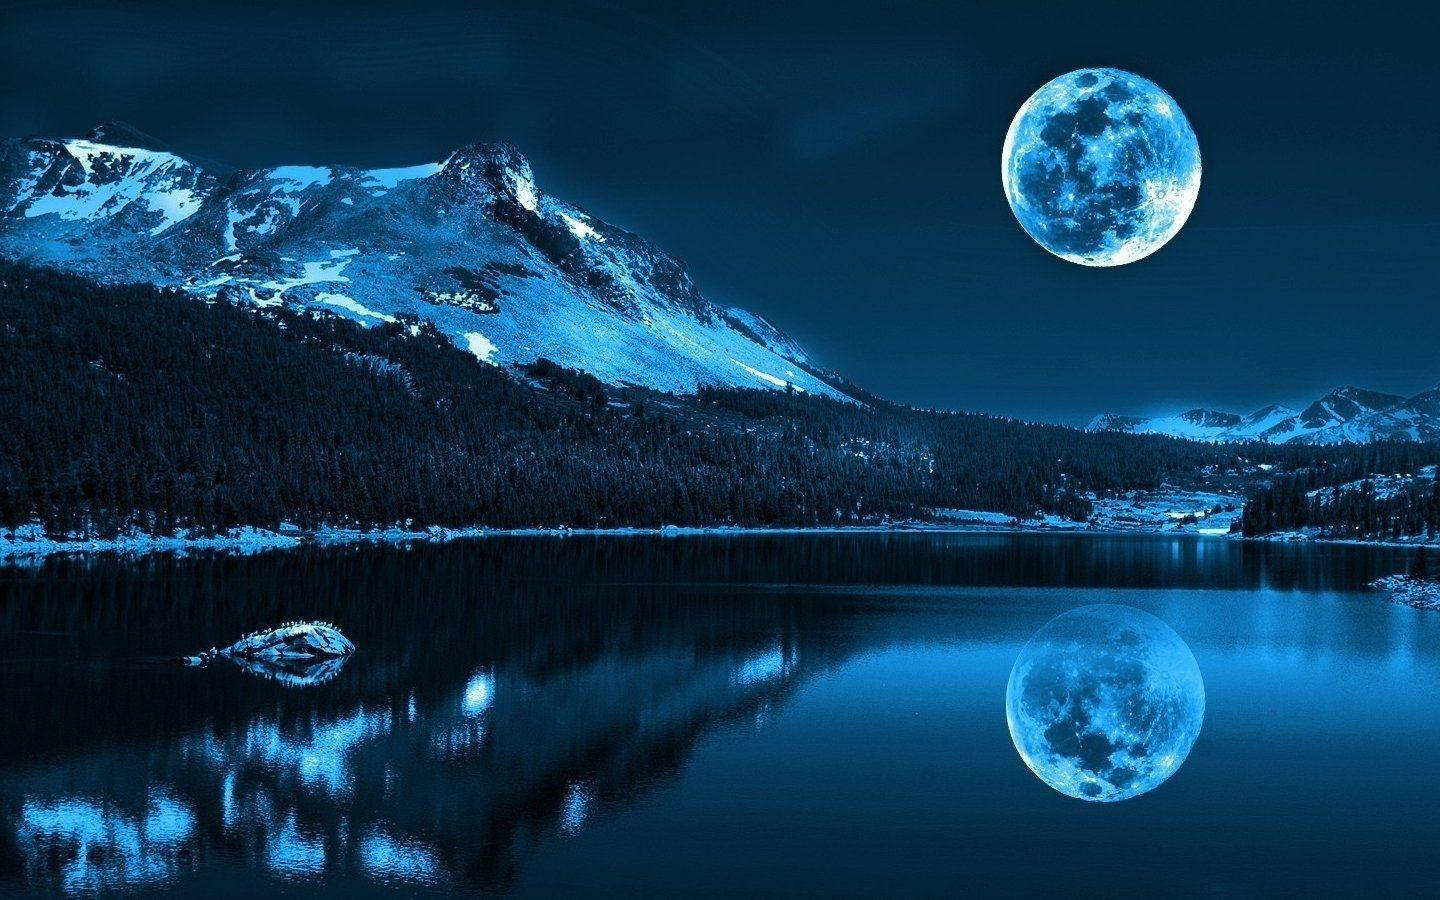 Natural Blue Aesthetic Lake With Full Moon